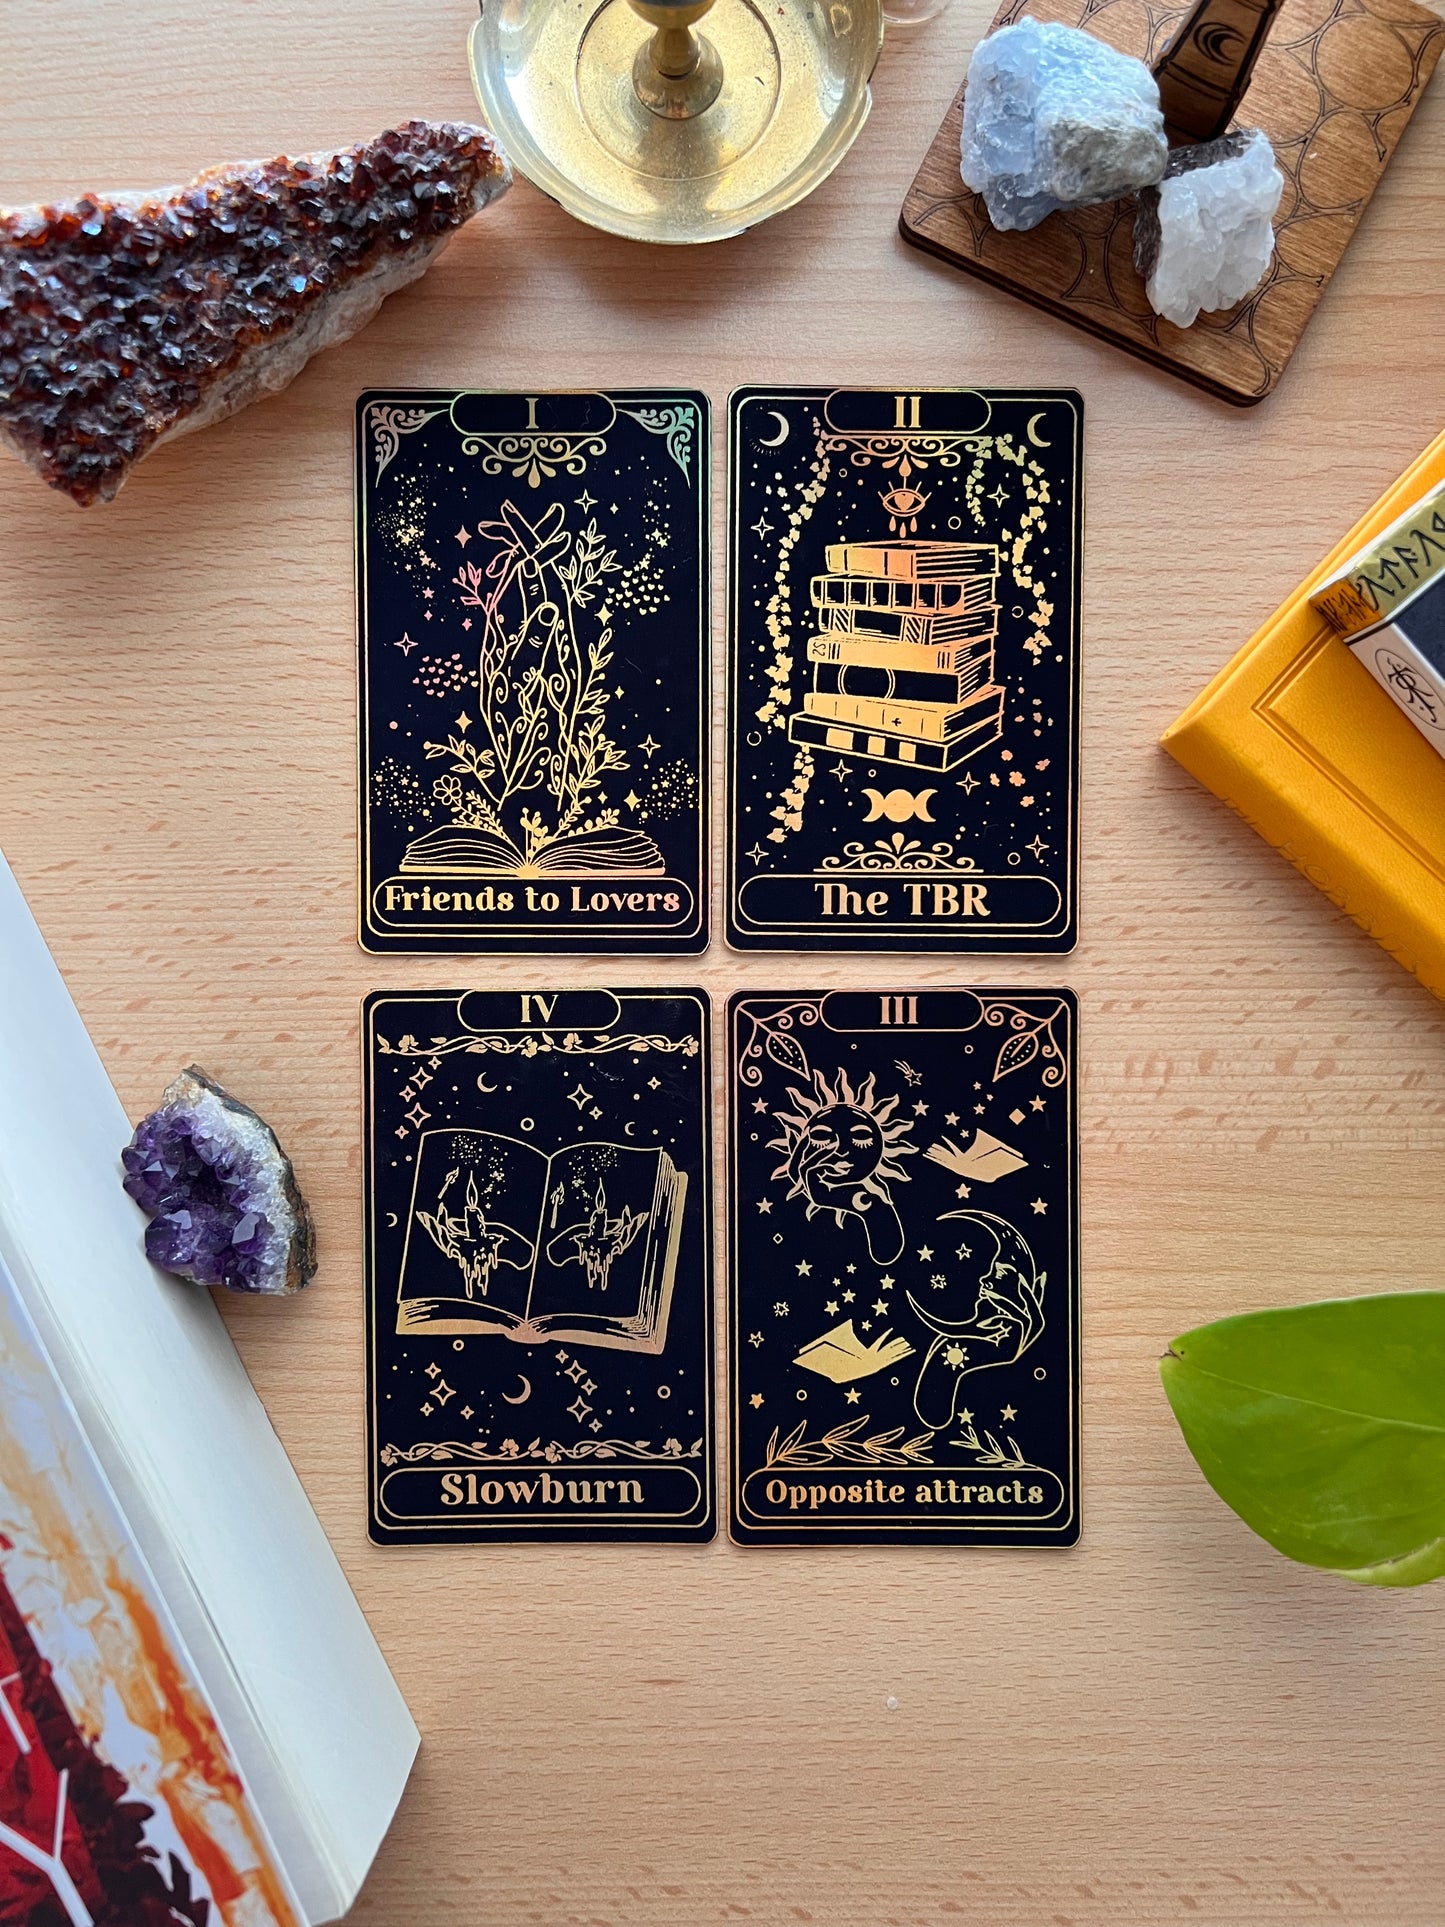 Book trope “tarot cards” holographic